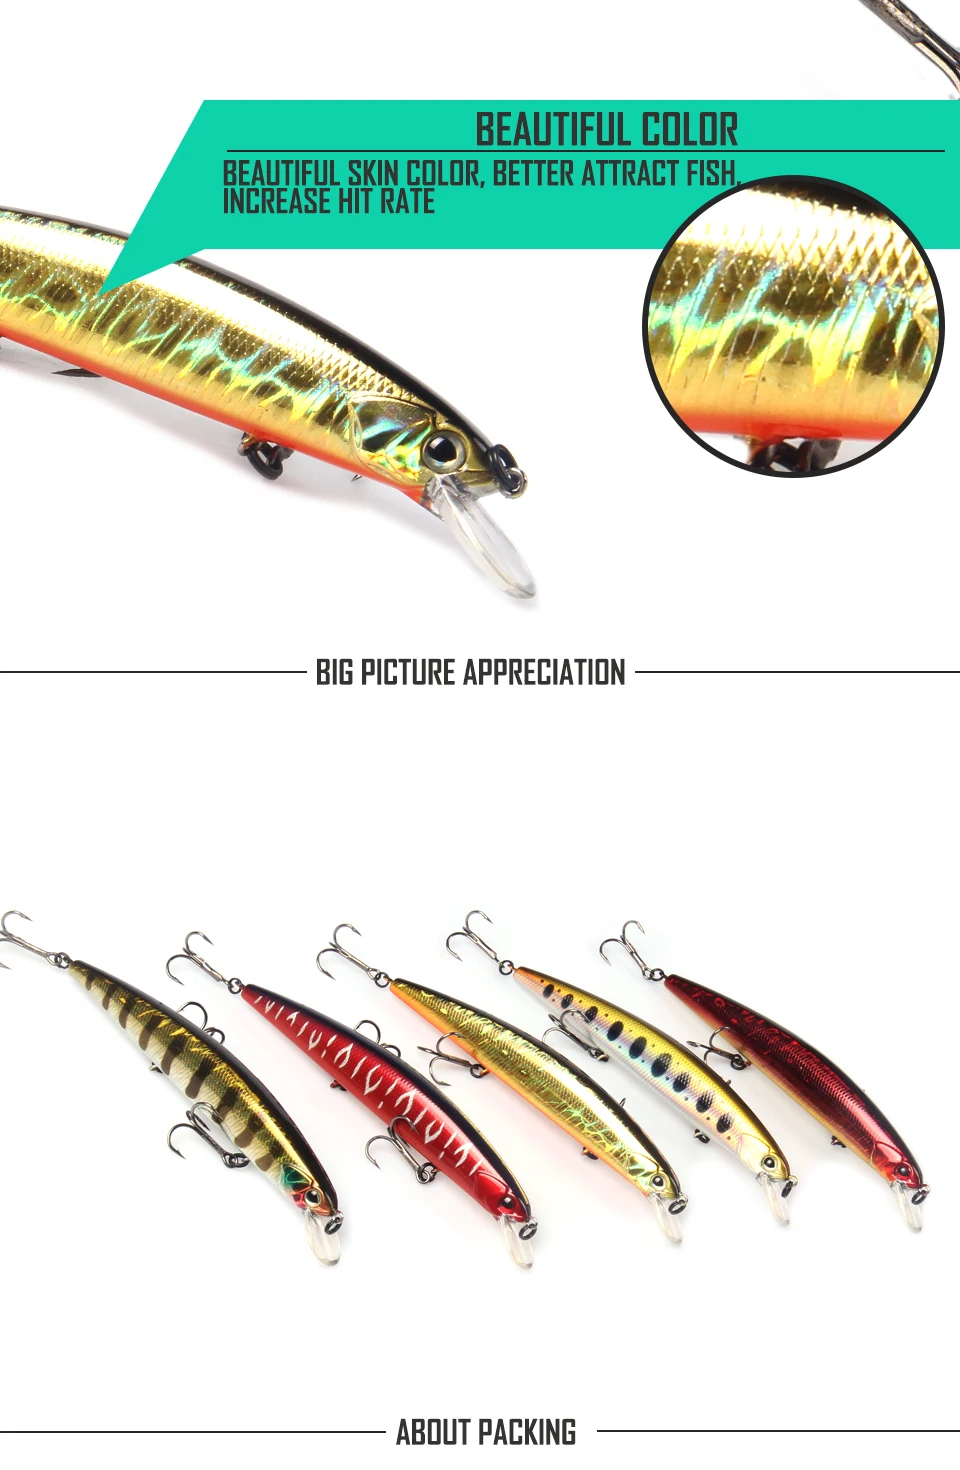 BEARKING for artificial Fishing lures minnow quality wobblers baits 13cm 21g suspending hot model crankbaits popper